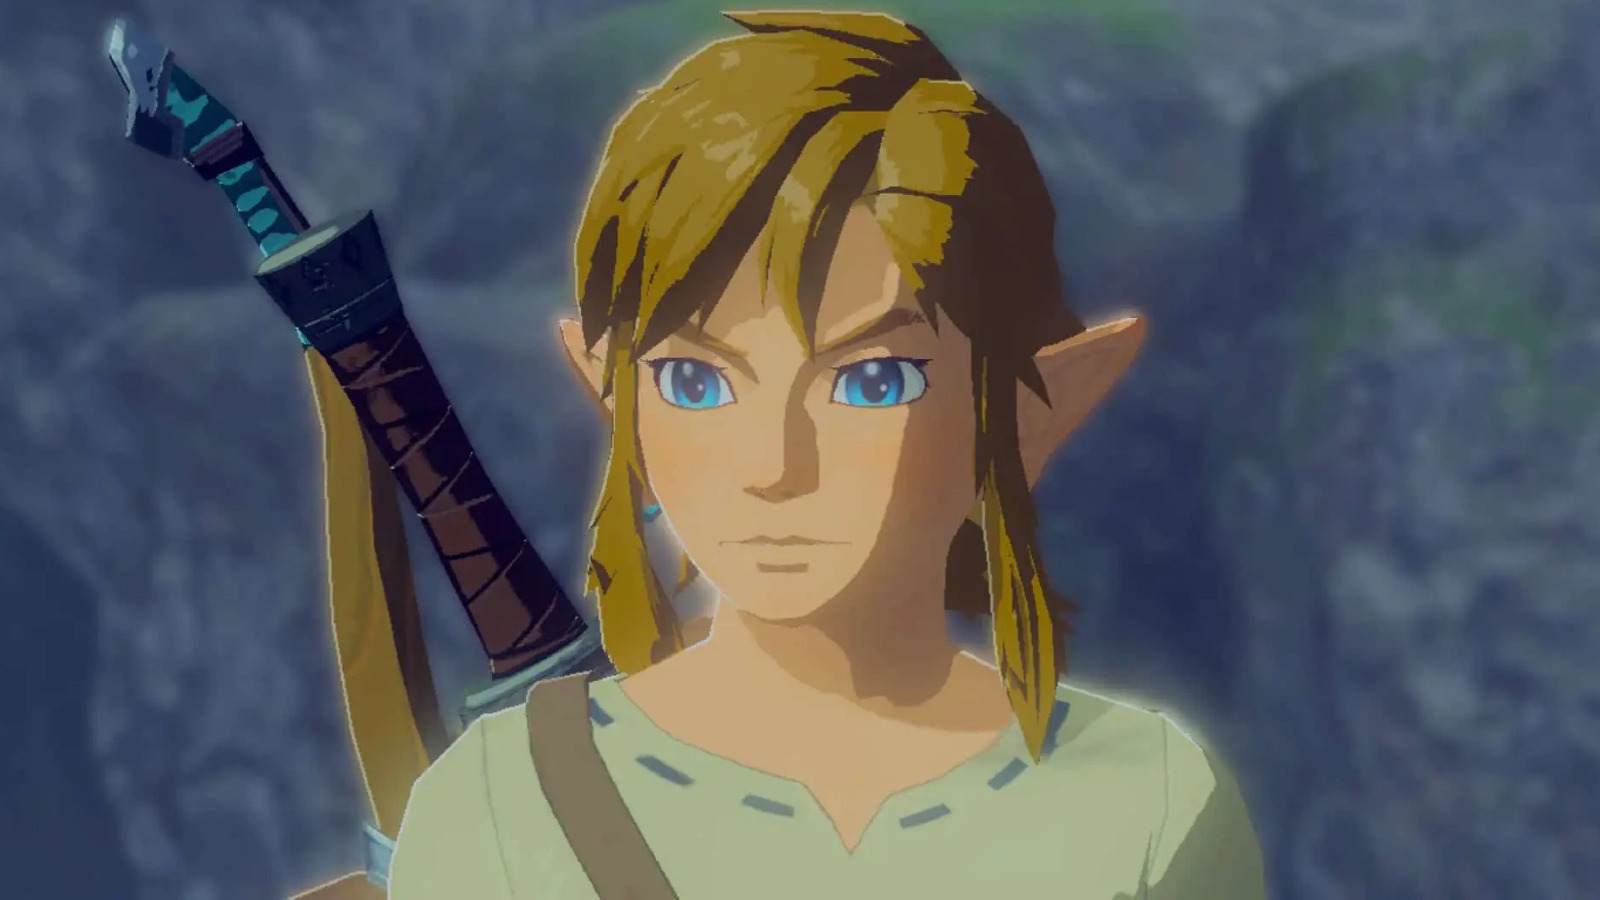 Legend Of Zelda's Live-Action Movie Is Even More Exciting Based On